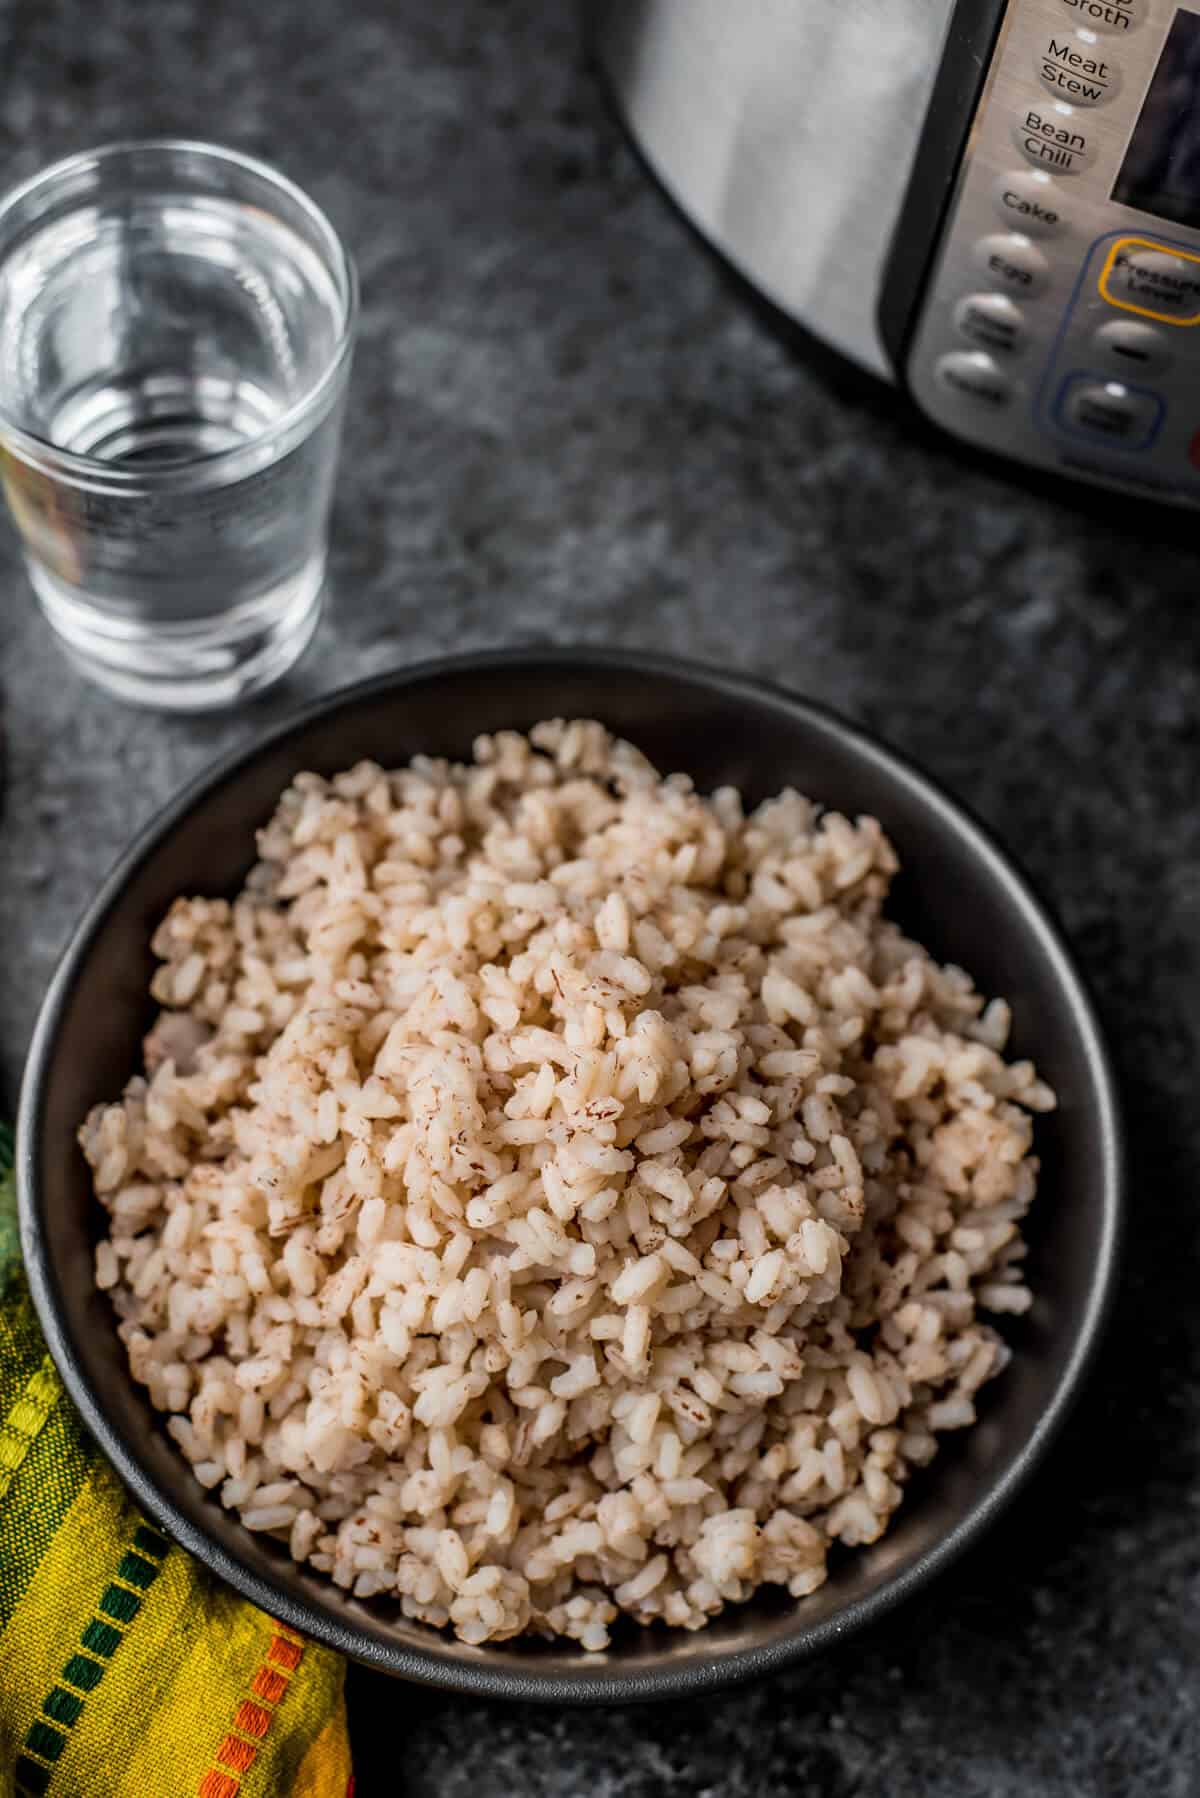 A black bowl with kerala matta rice after cooking in the Instant Pot with a glass of water to the top left and the Instant Pot in the top right of the photo.